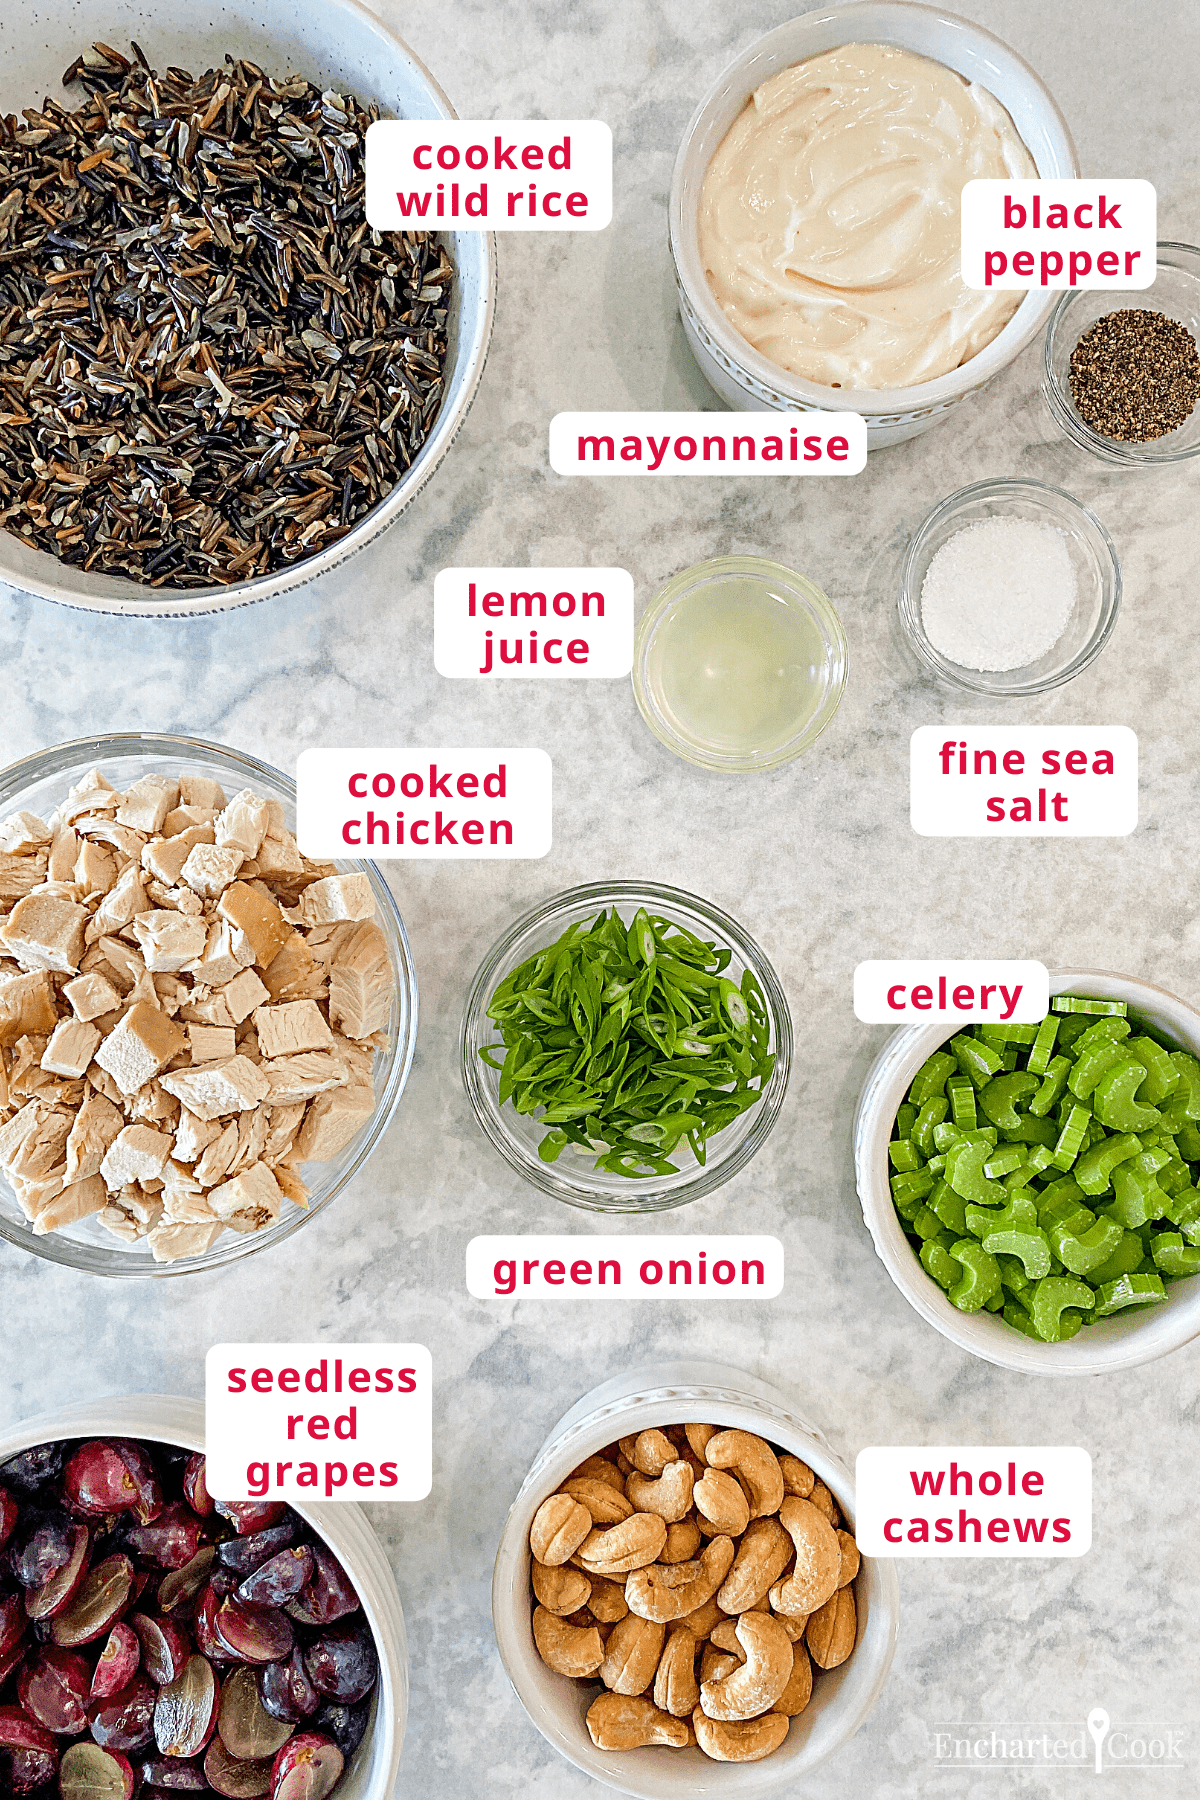 The ingredients, clockwise from top right: black pepper, fine sea salt, celery, whole cashews, seedless red grapes, green onion, cooked chicken, lemon juice, mayonnaise, cooked wild rice.